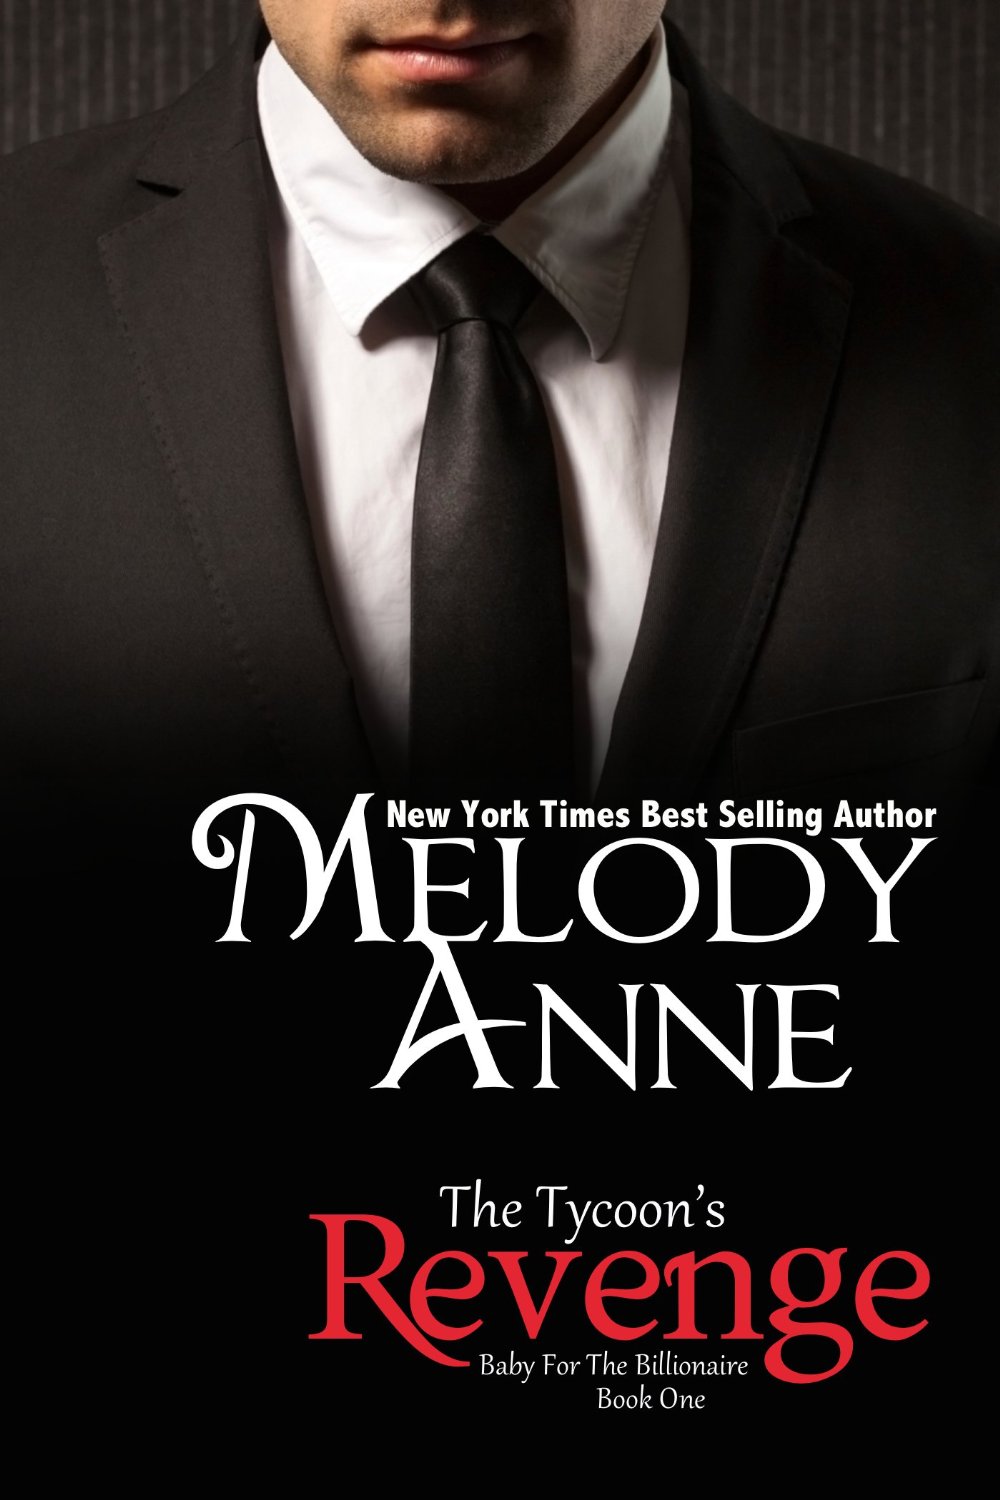 The Tycoon’s Revenge by Melody Anne